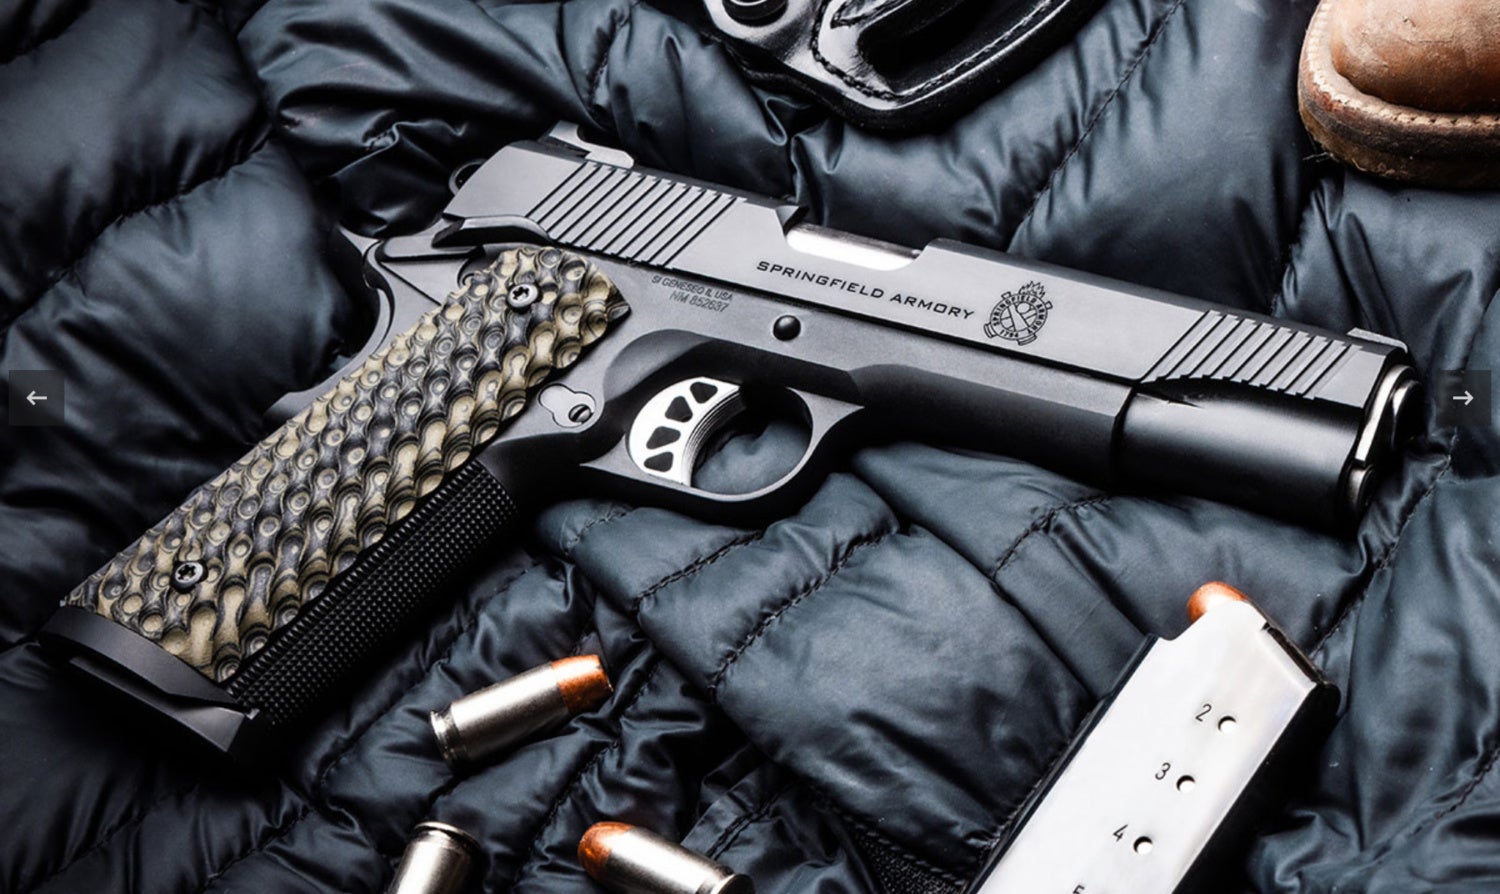 Springfield Armory Reveals Innovative Features in New TRP Pistol Series